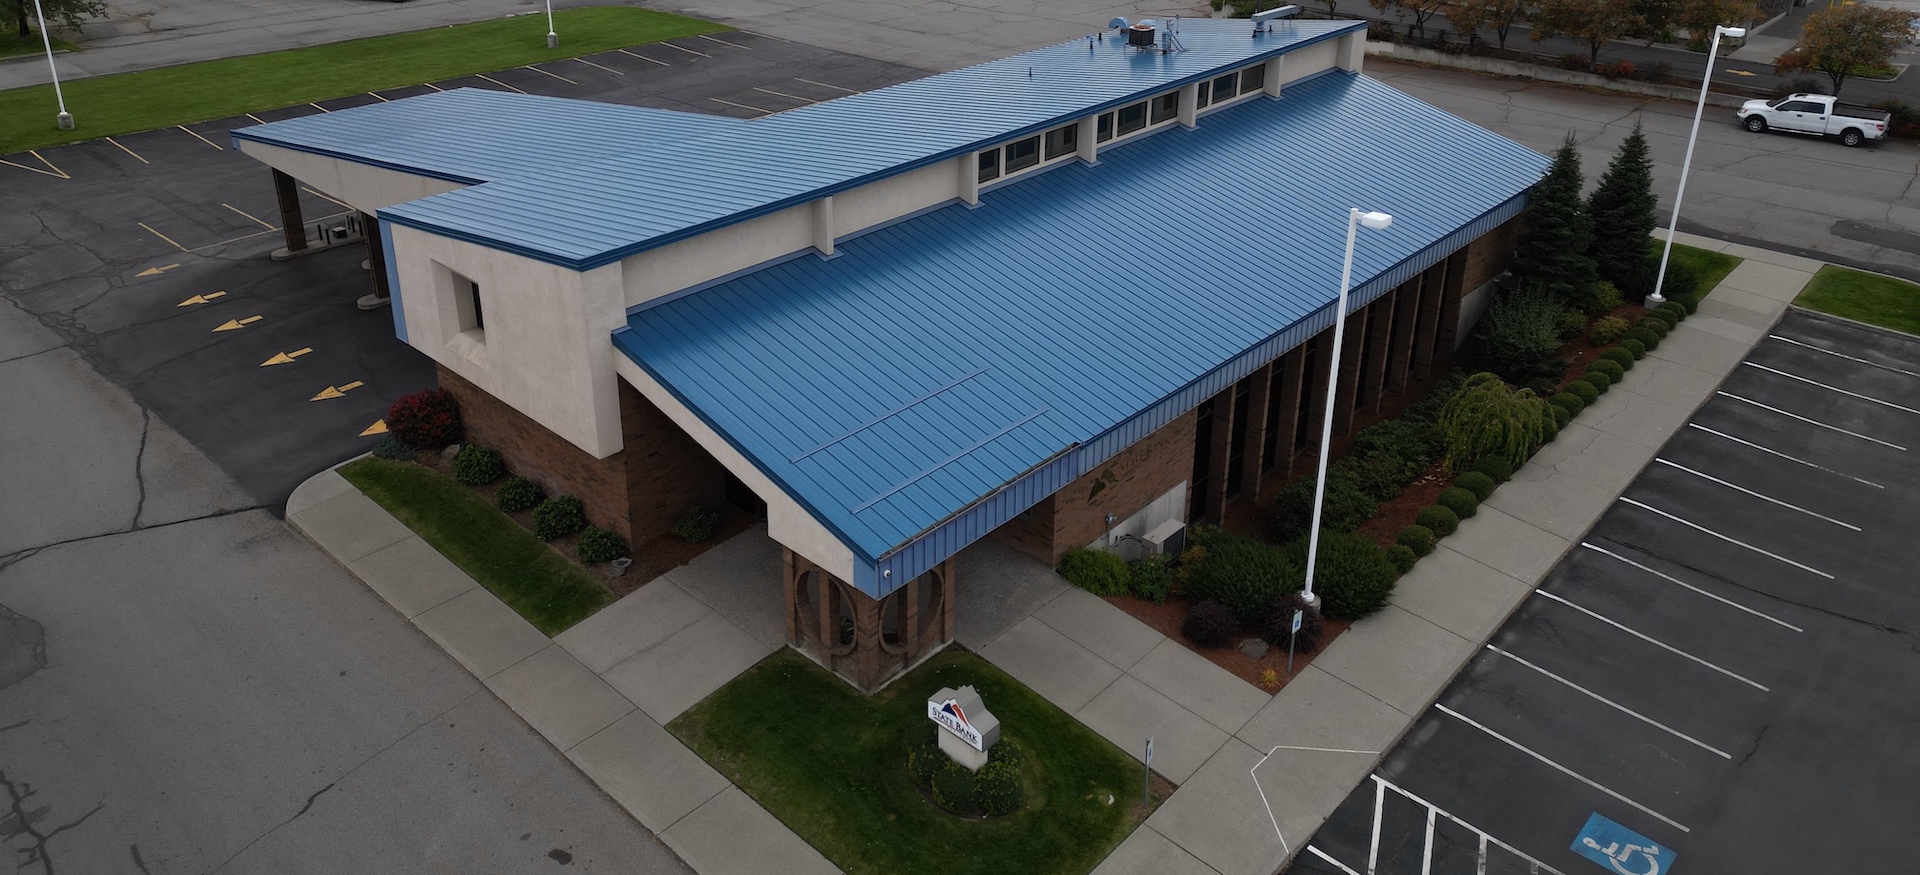 State Bank NW, Spokane Valley Branch After Metal Roof Replacement Project Completion